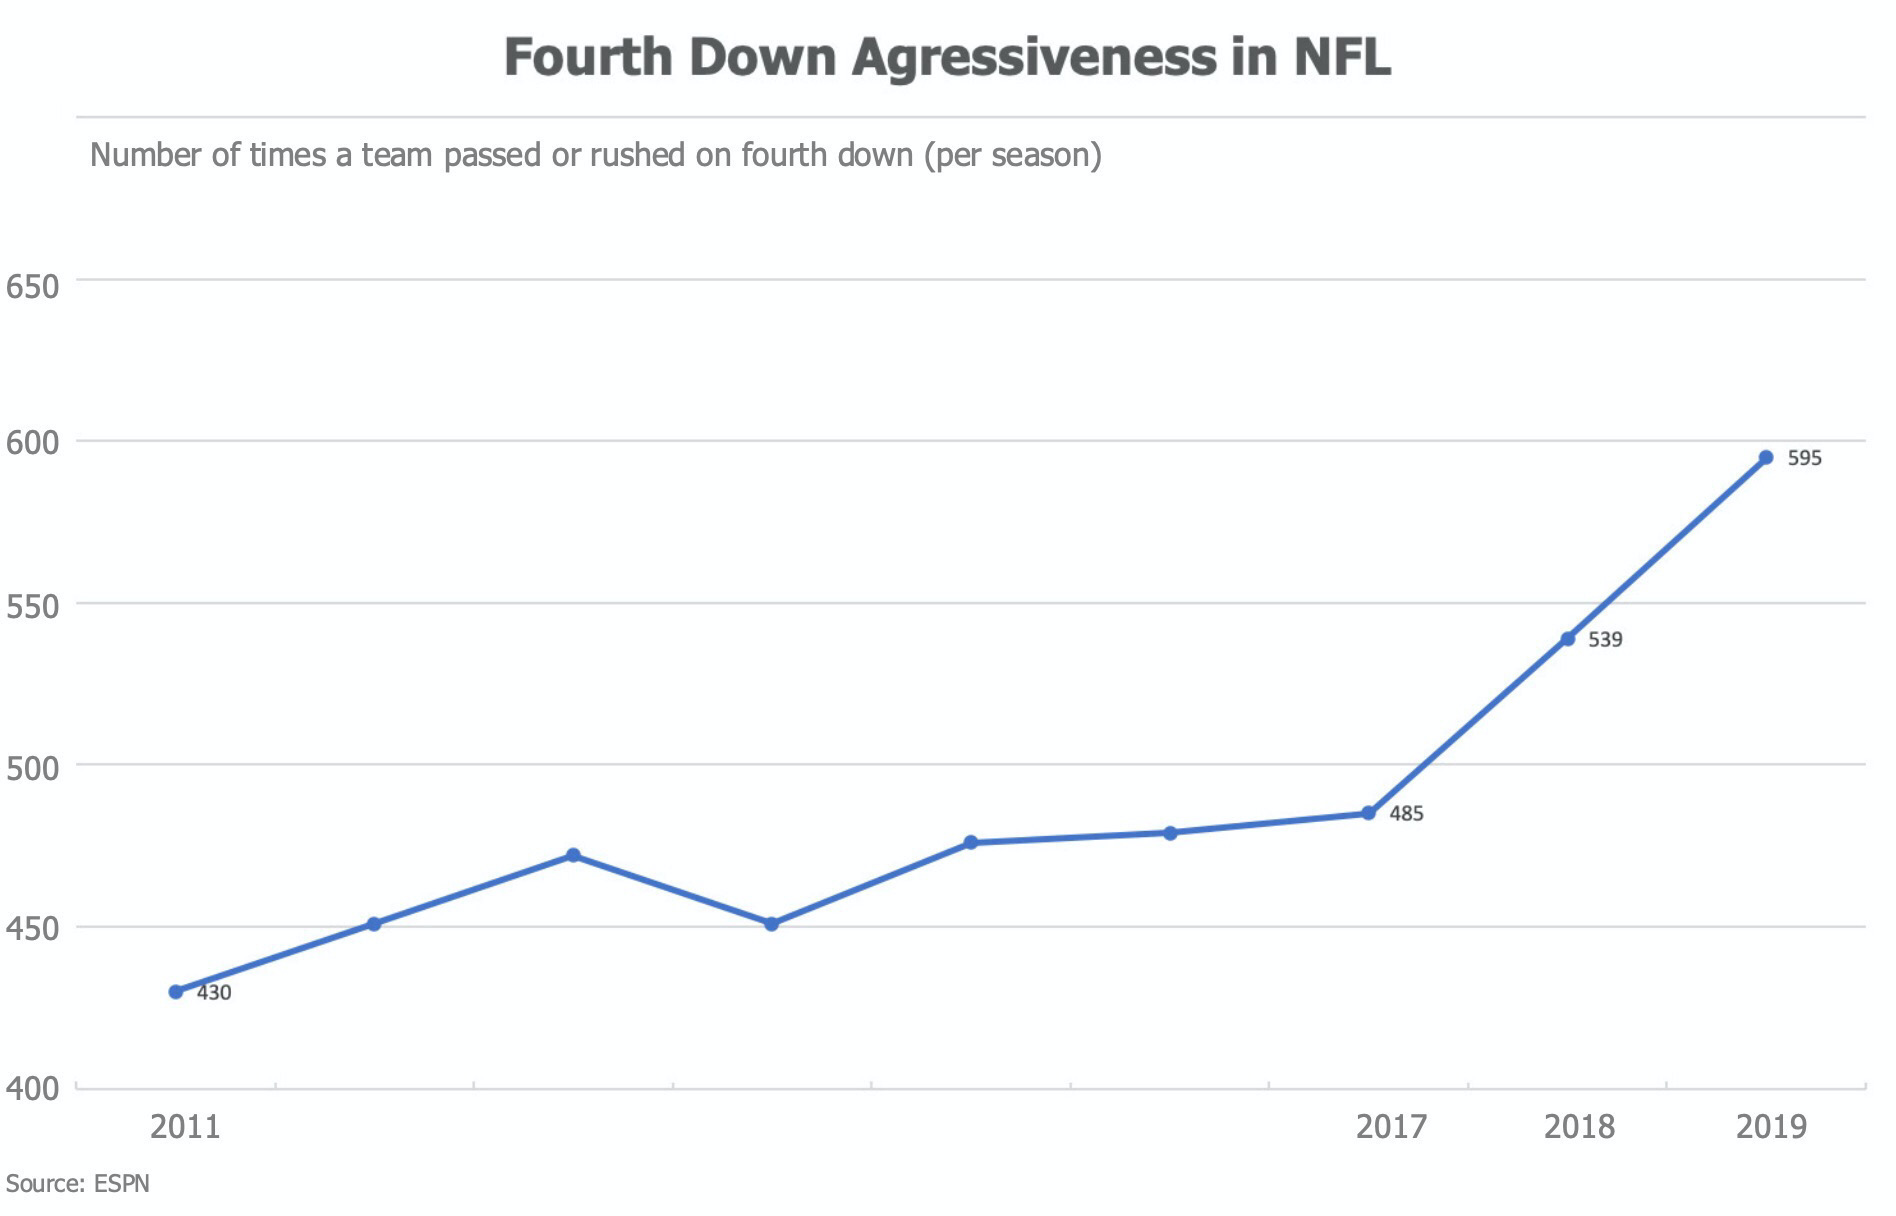 Fourth Down Aggressiveness in the NFL